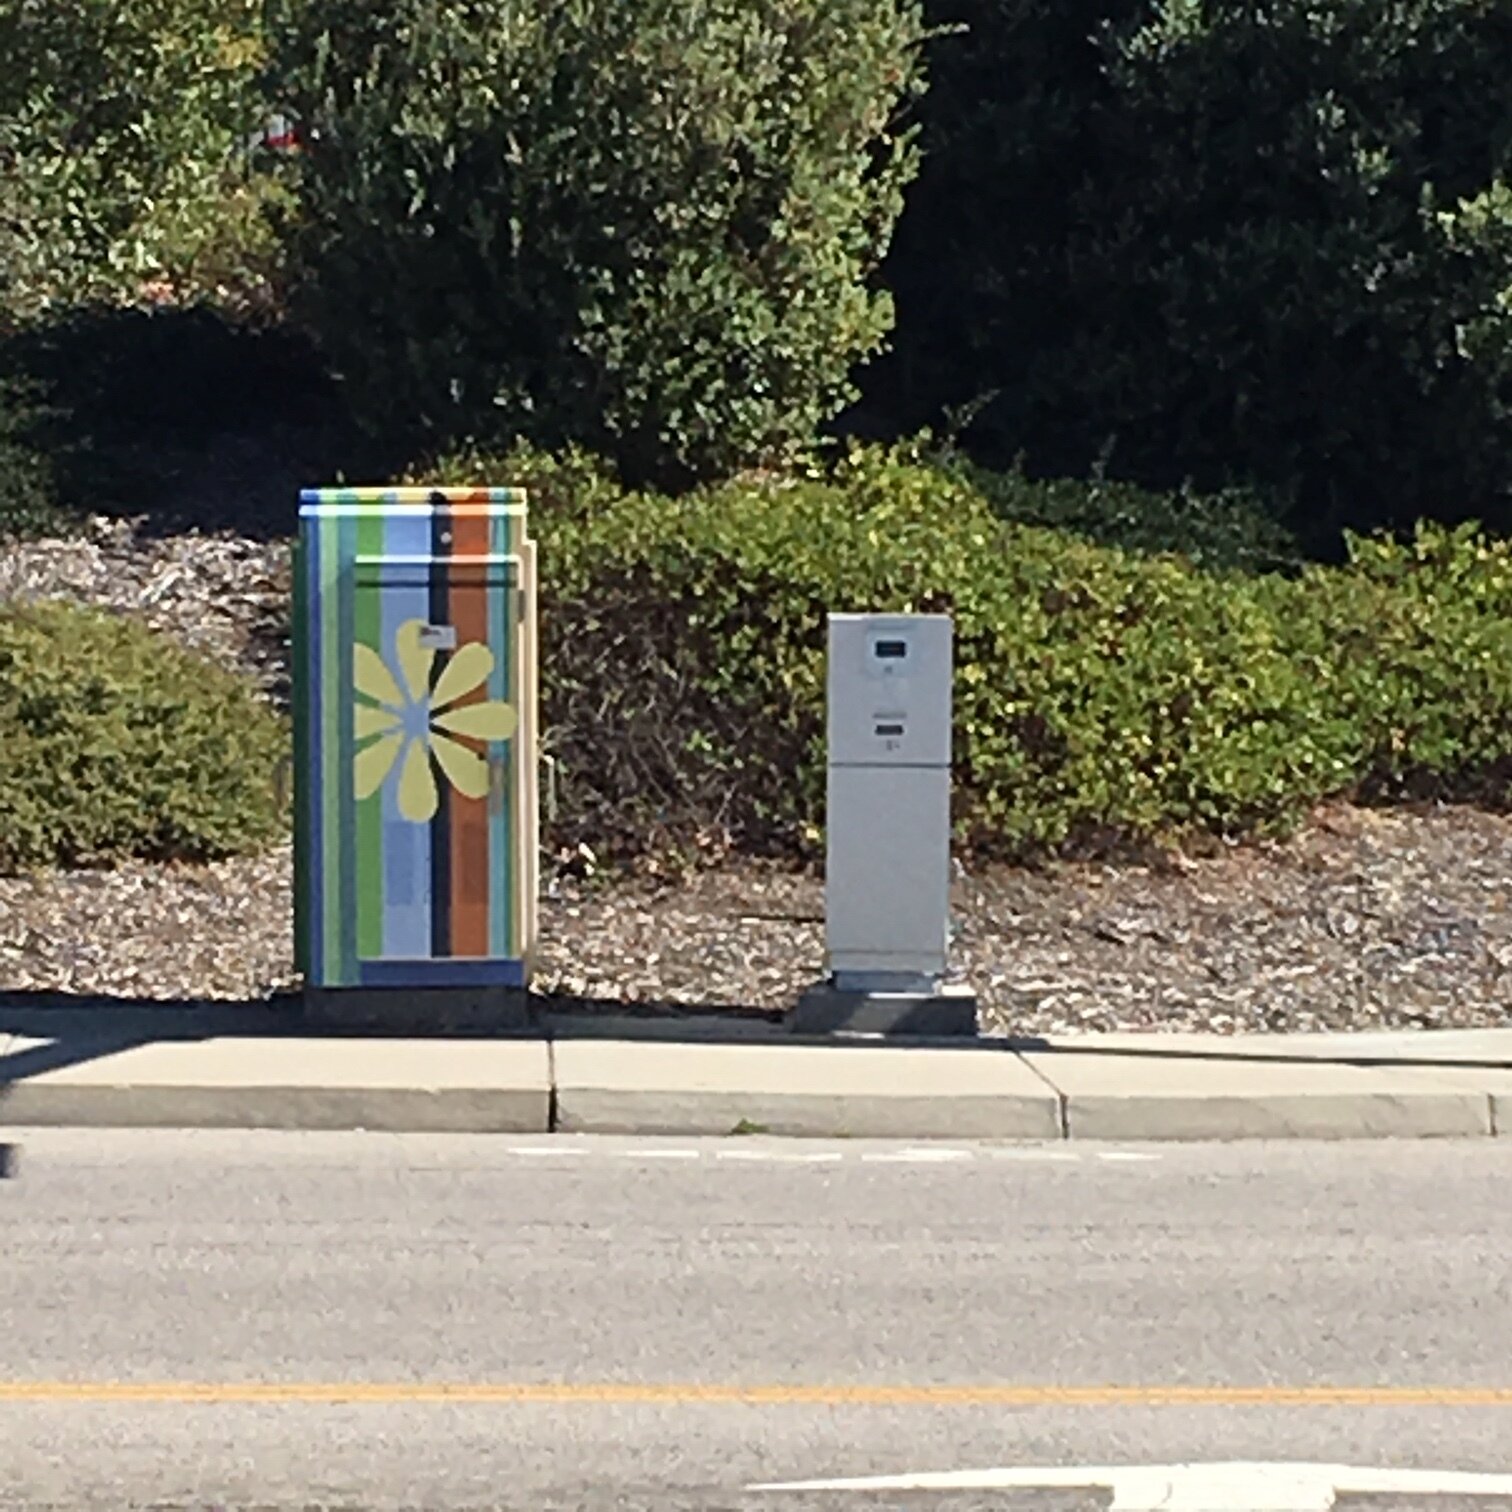    Flower Power   SLO Box Art Project Broad and Industrial Streets San Luis Obispo, CA 2018 